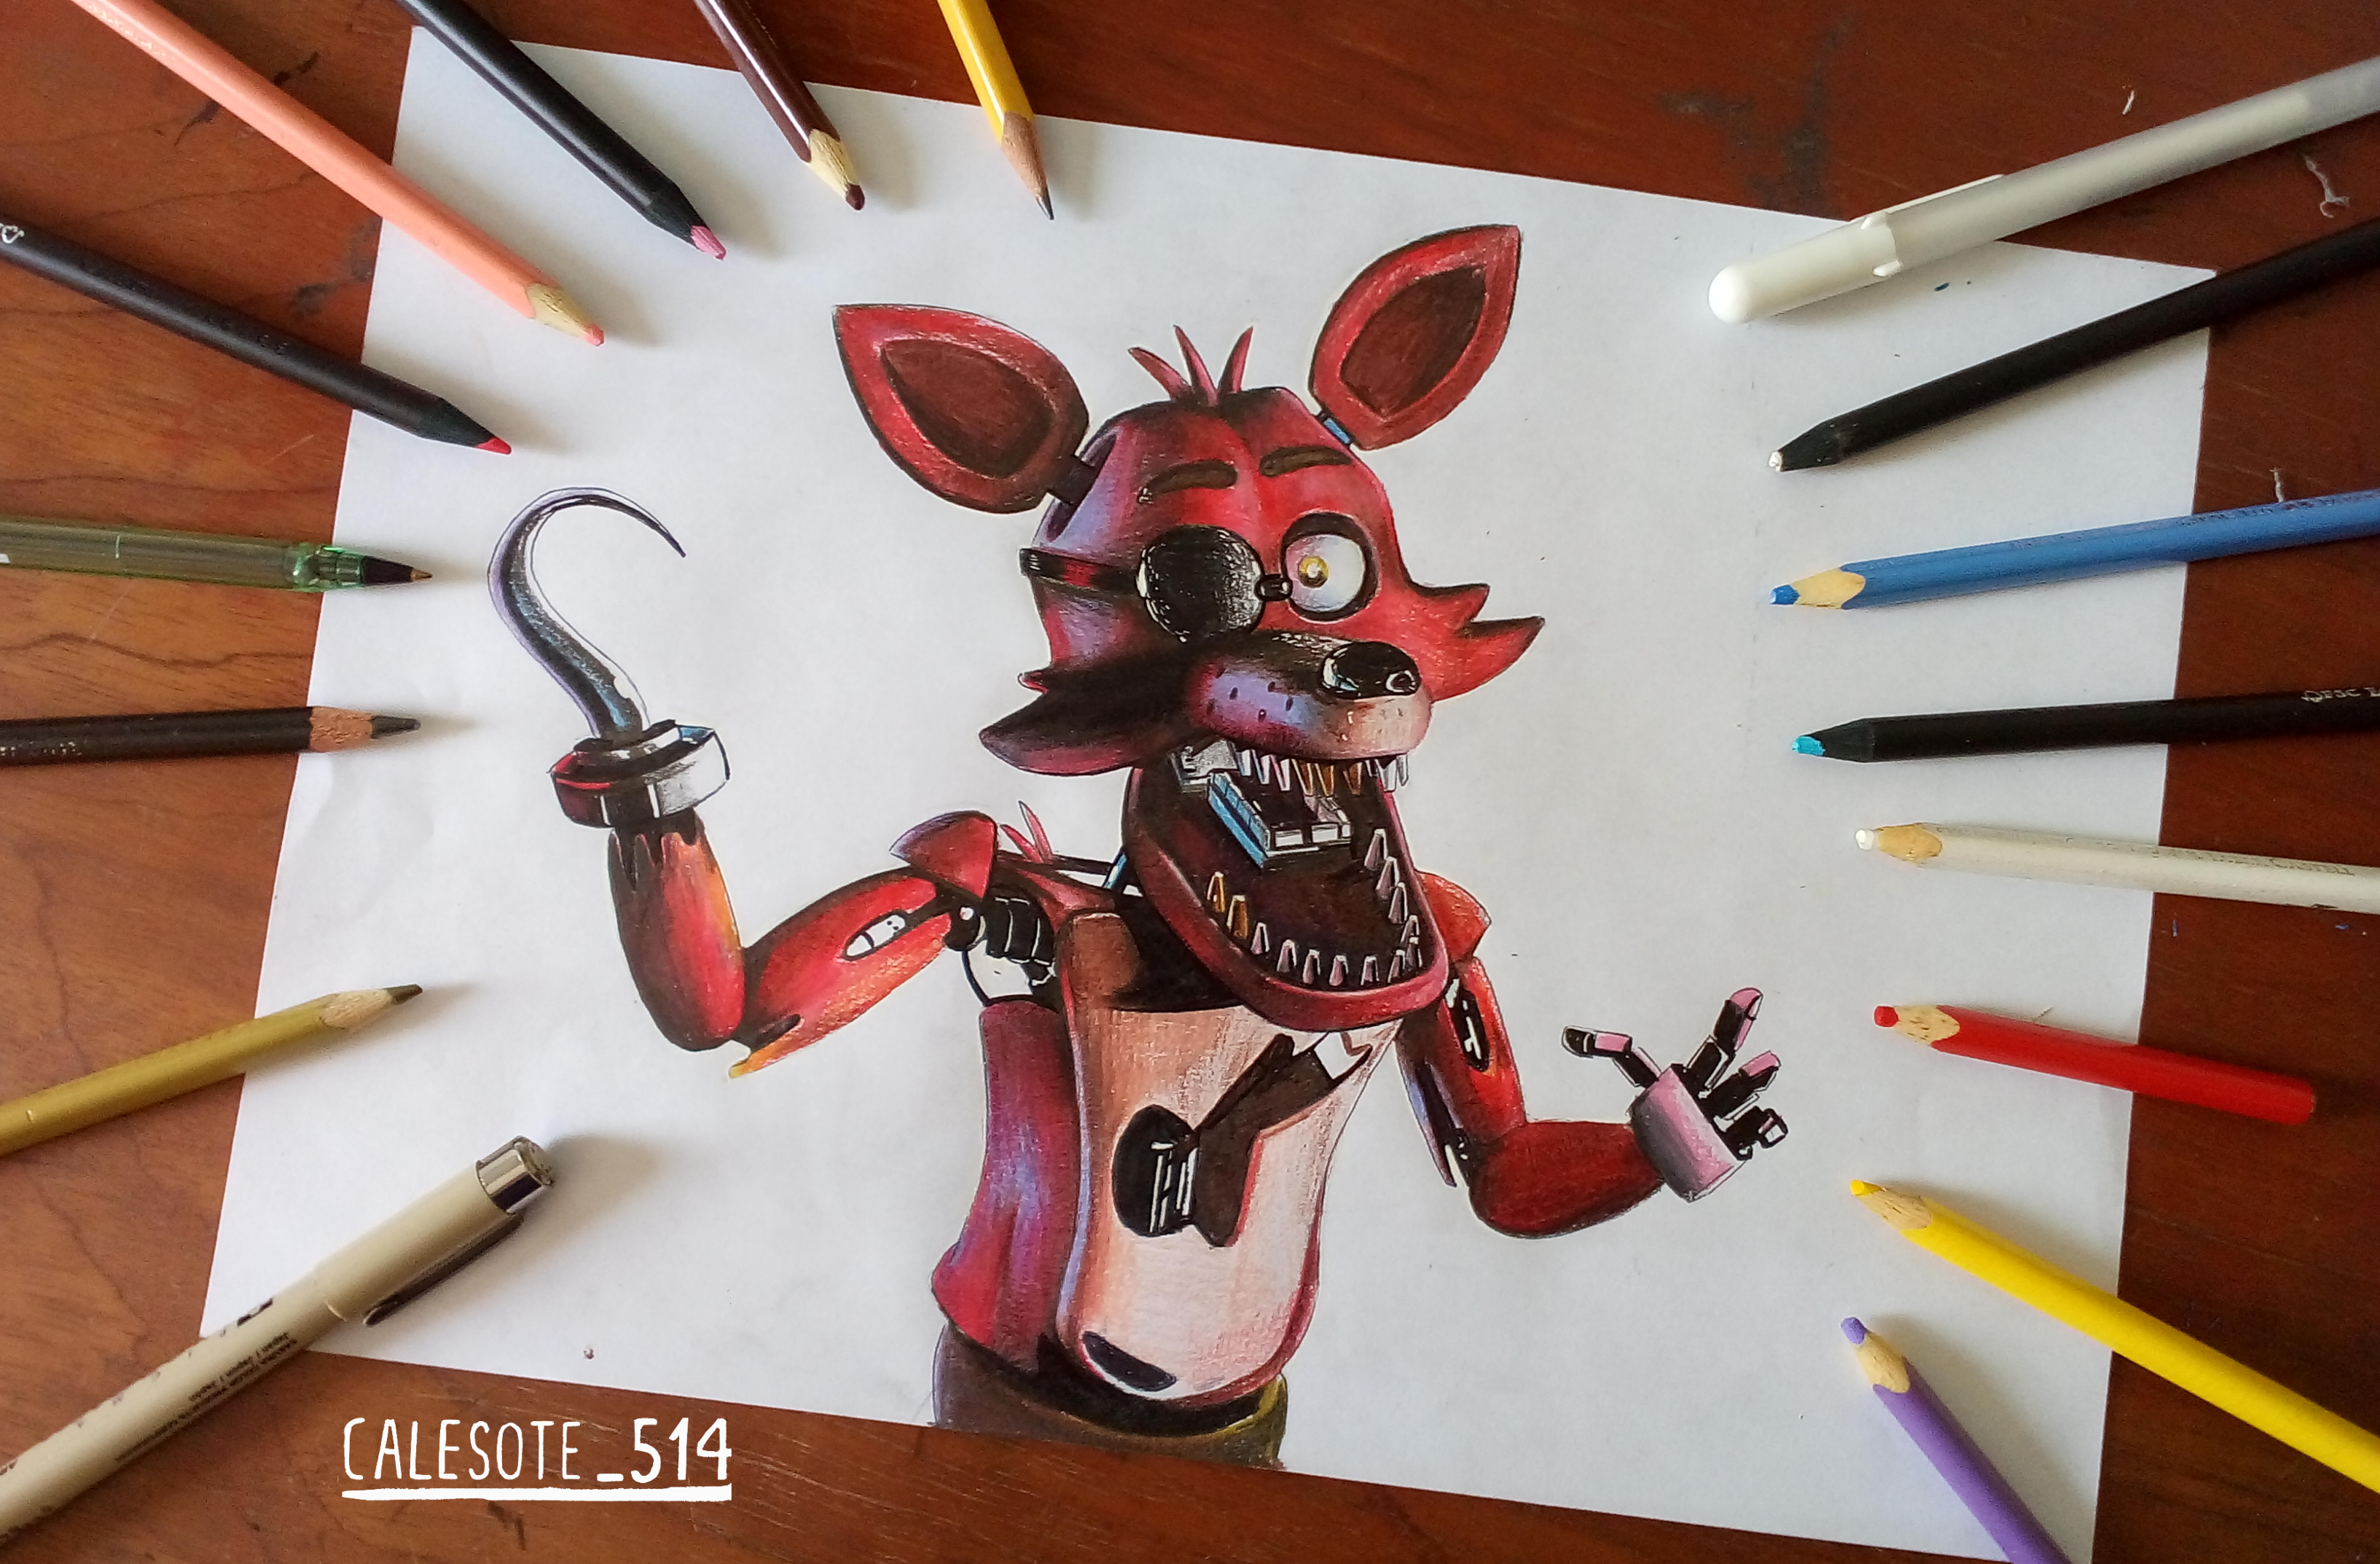 Foxy The Pirate Art Tradicional - Calesote514 by Calesote514 on DeviantArt